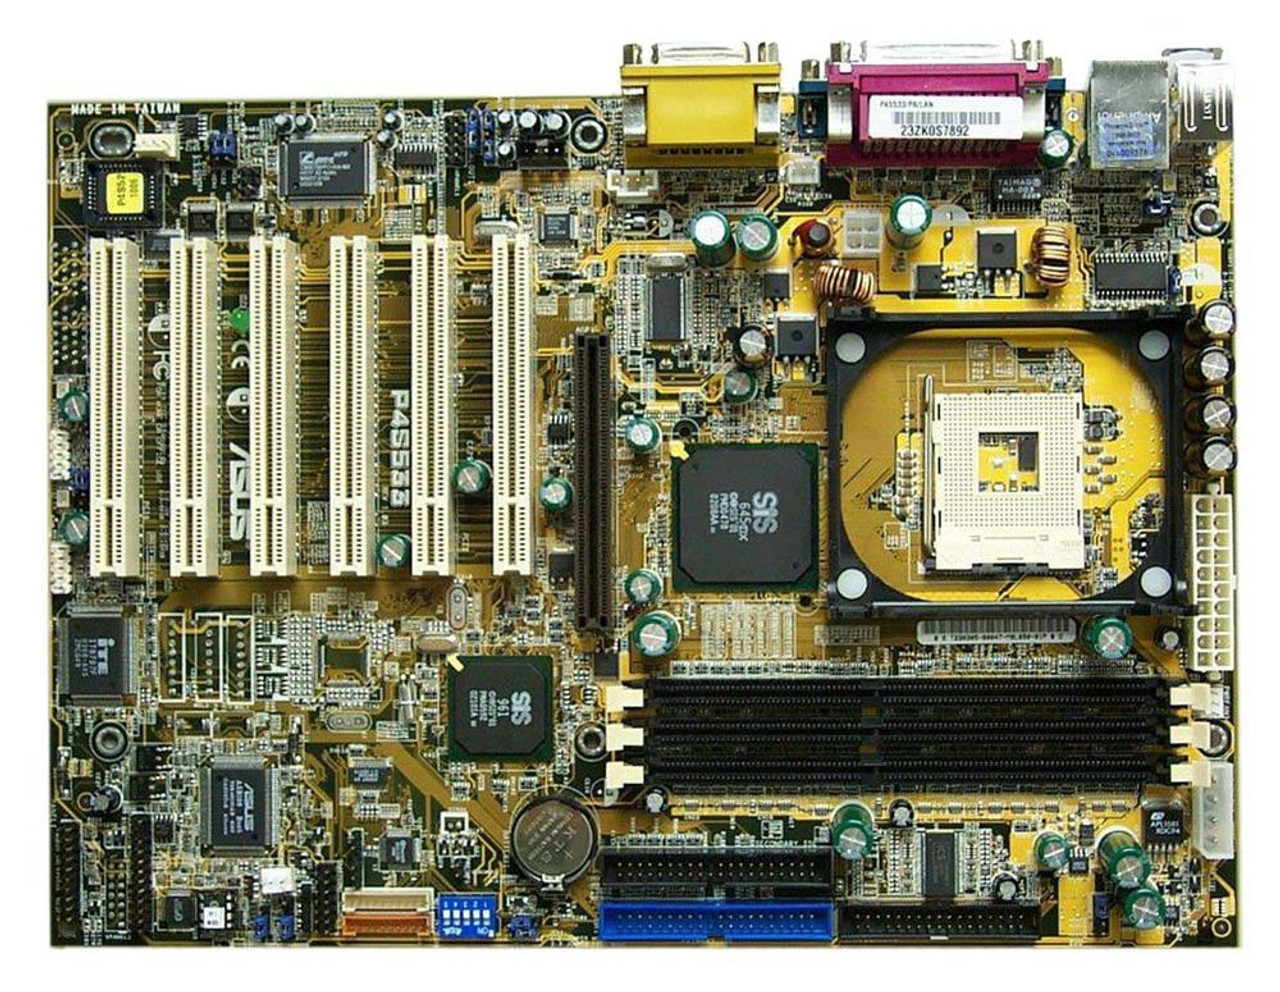 P4S533-1 ASUS P4S533 Socket 478 SIS 645DX Chipset Intel Pentium 4  Processors Support DDR 3x DIMM 2x ATA-133 ATX Motherboard (Refurbished)